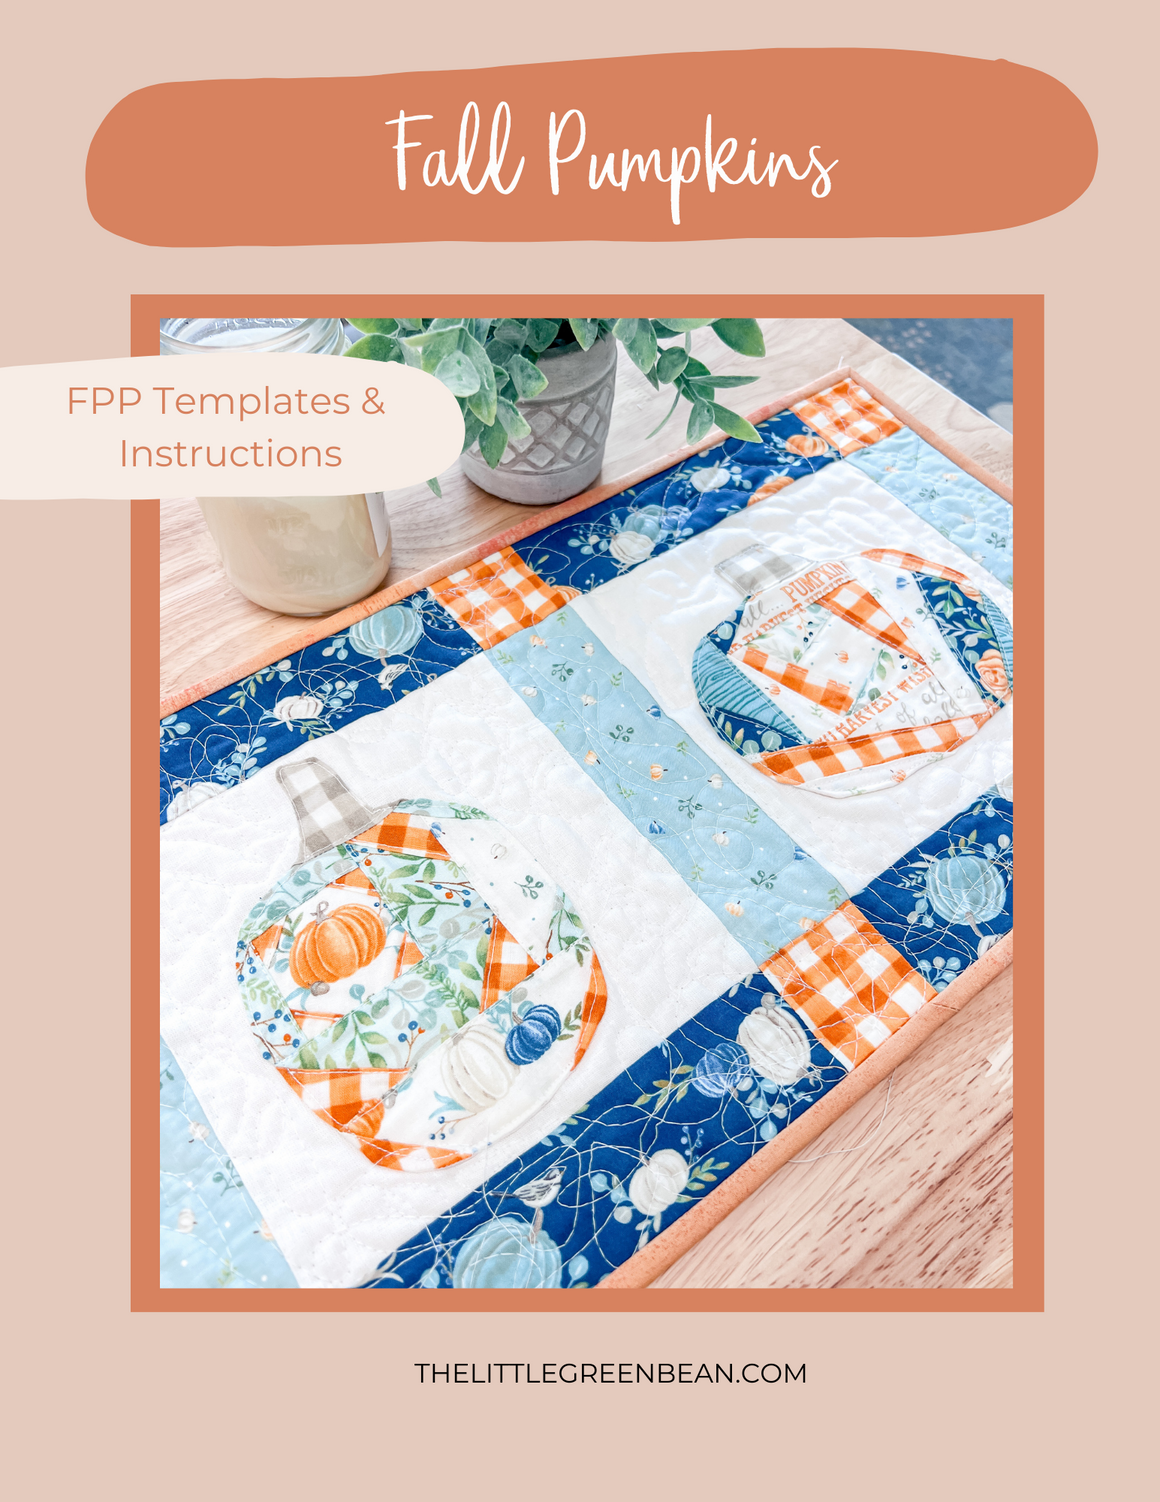 Paper pieced Fall Pumpkins Template & Instructions | 4 FPP templates included